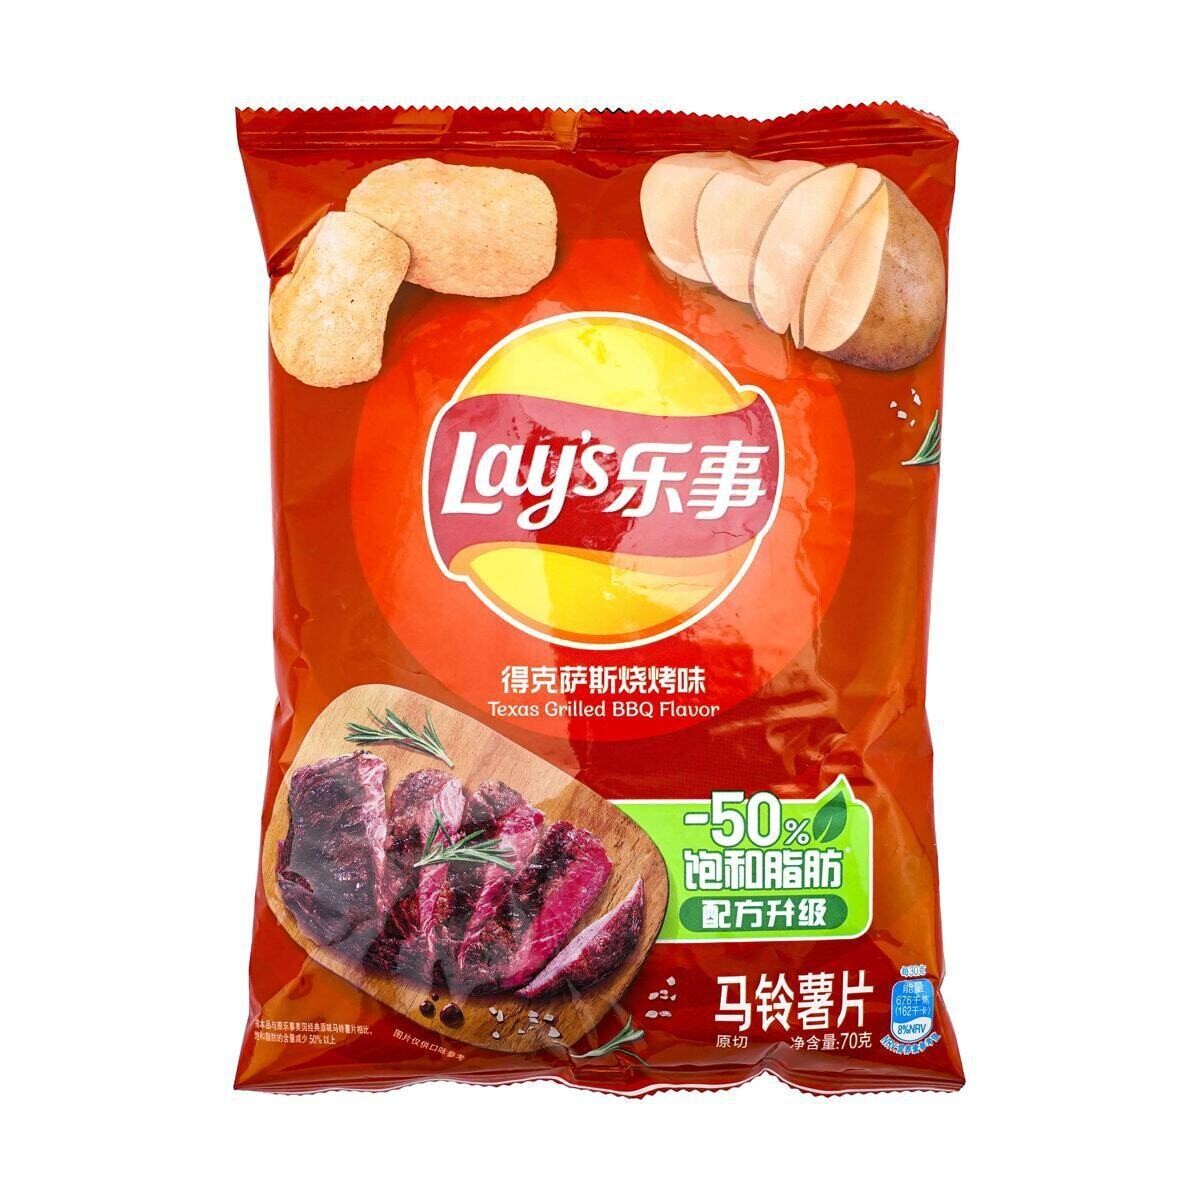 Lays Texas /grilled BBQ